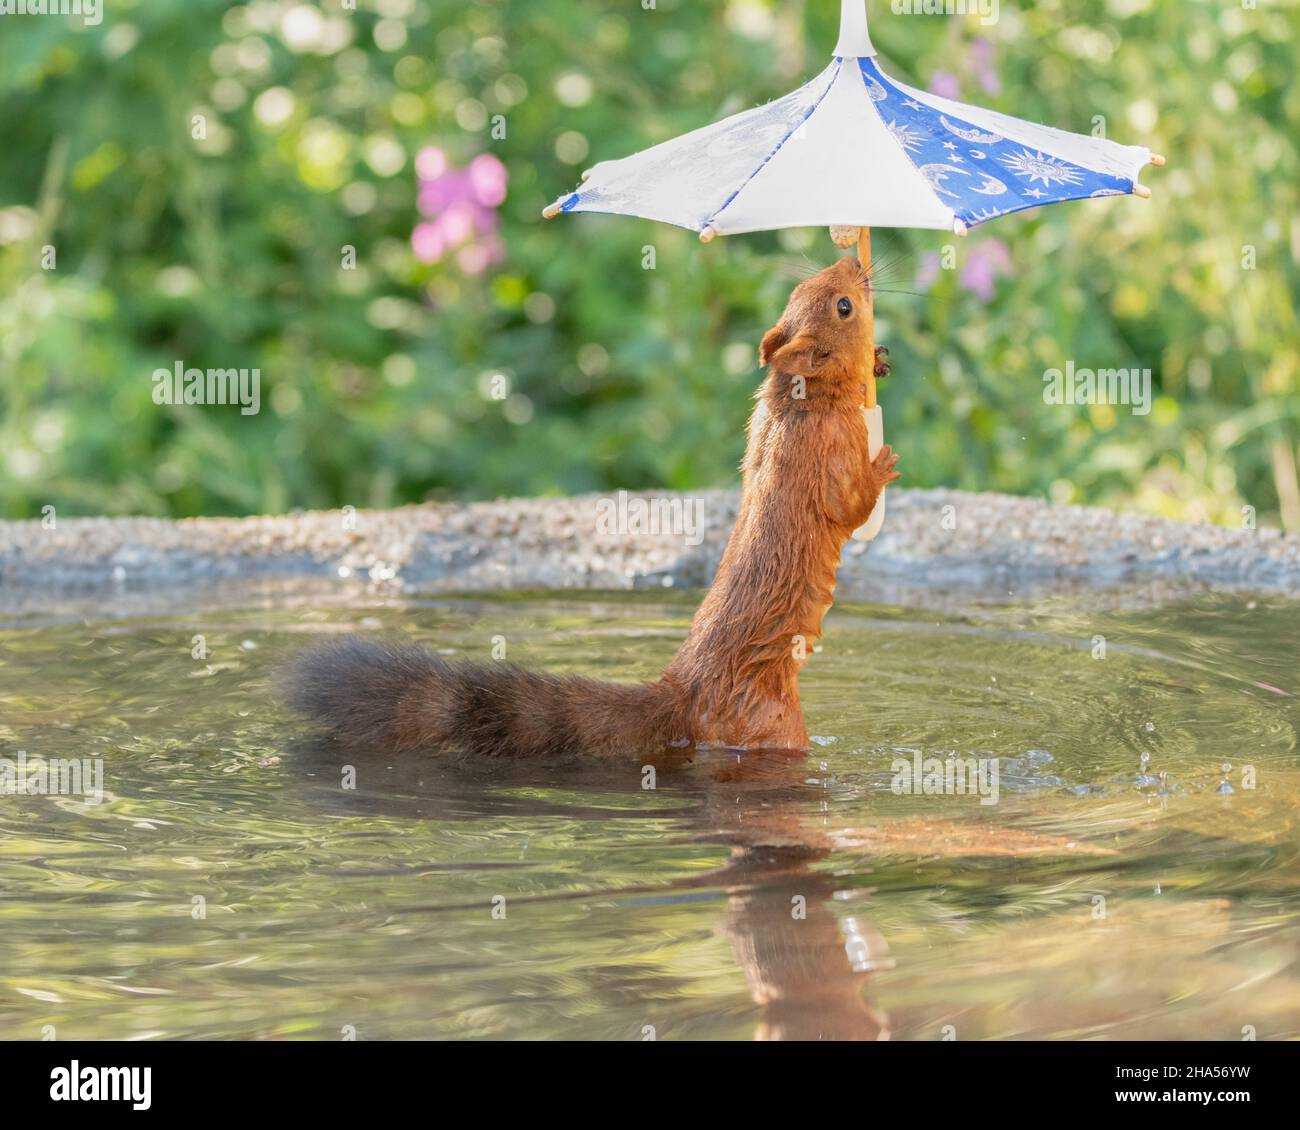 red squirrel is standing in water with a umbrella Stock Photo